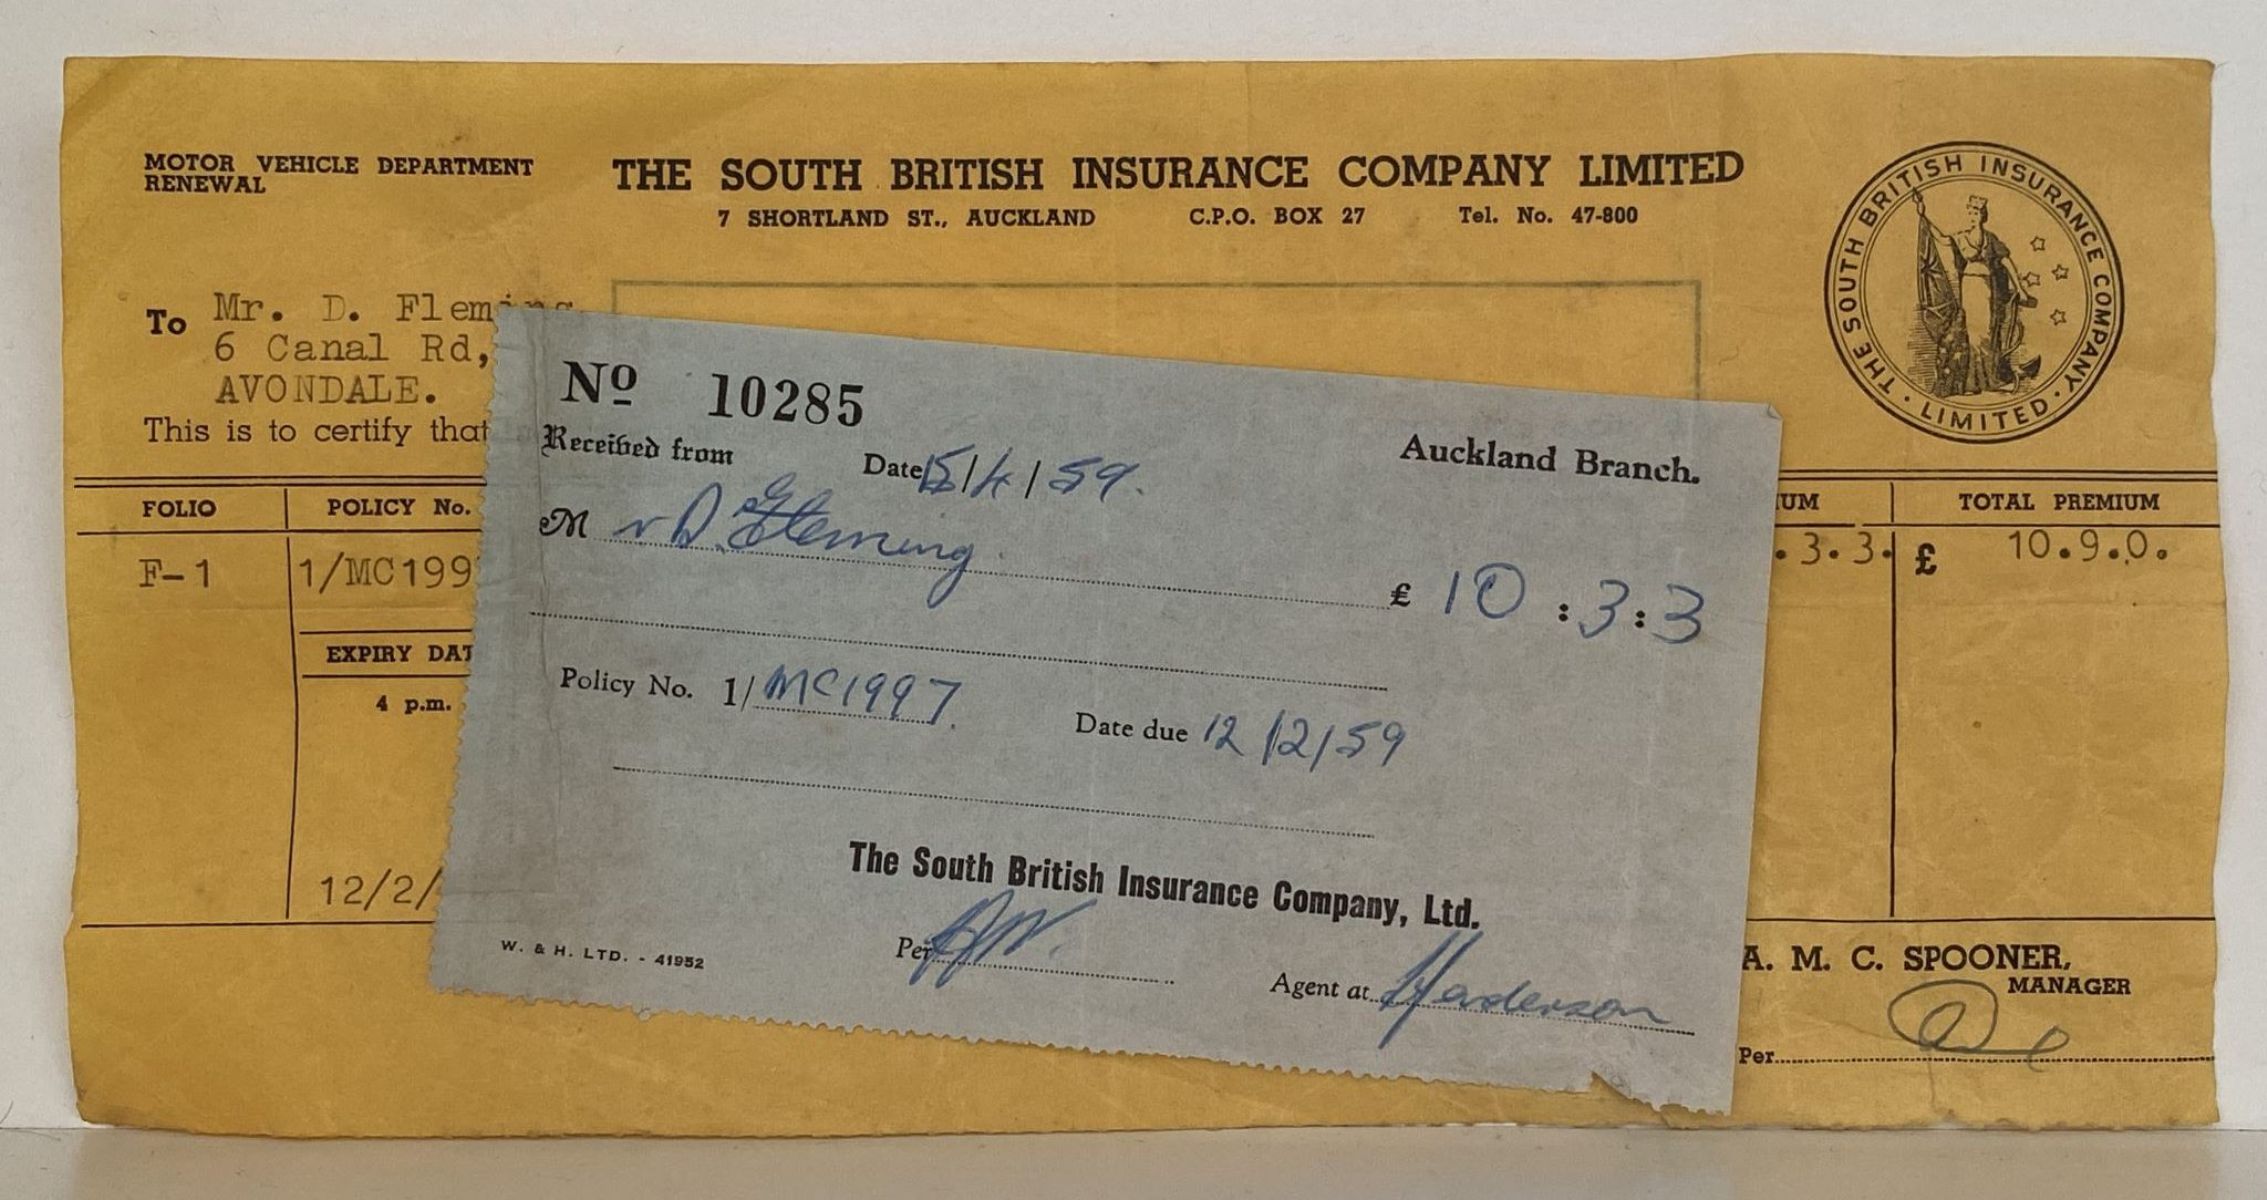 OLD INVOICE / RECEIPT: from The South British Insurance Company, Auckland 1959